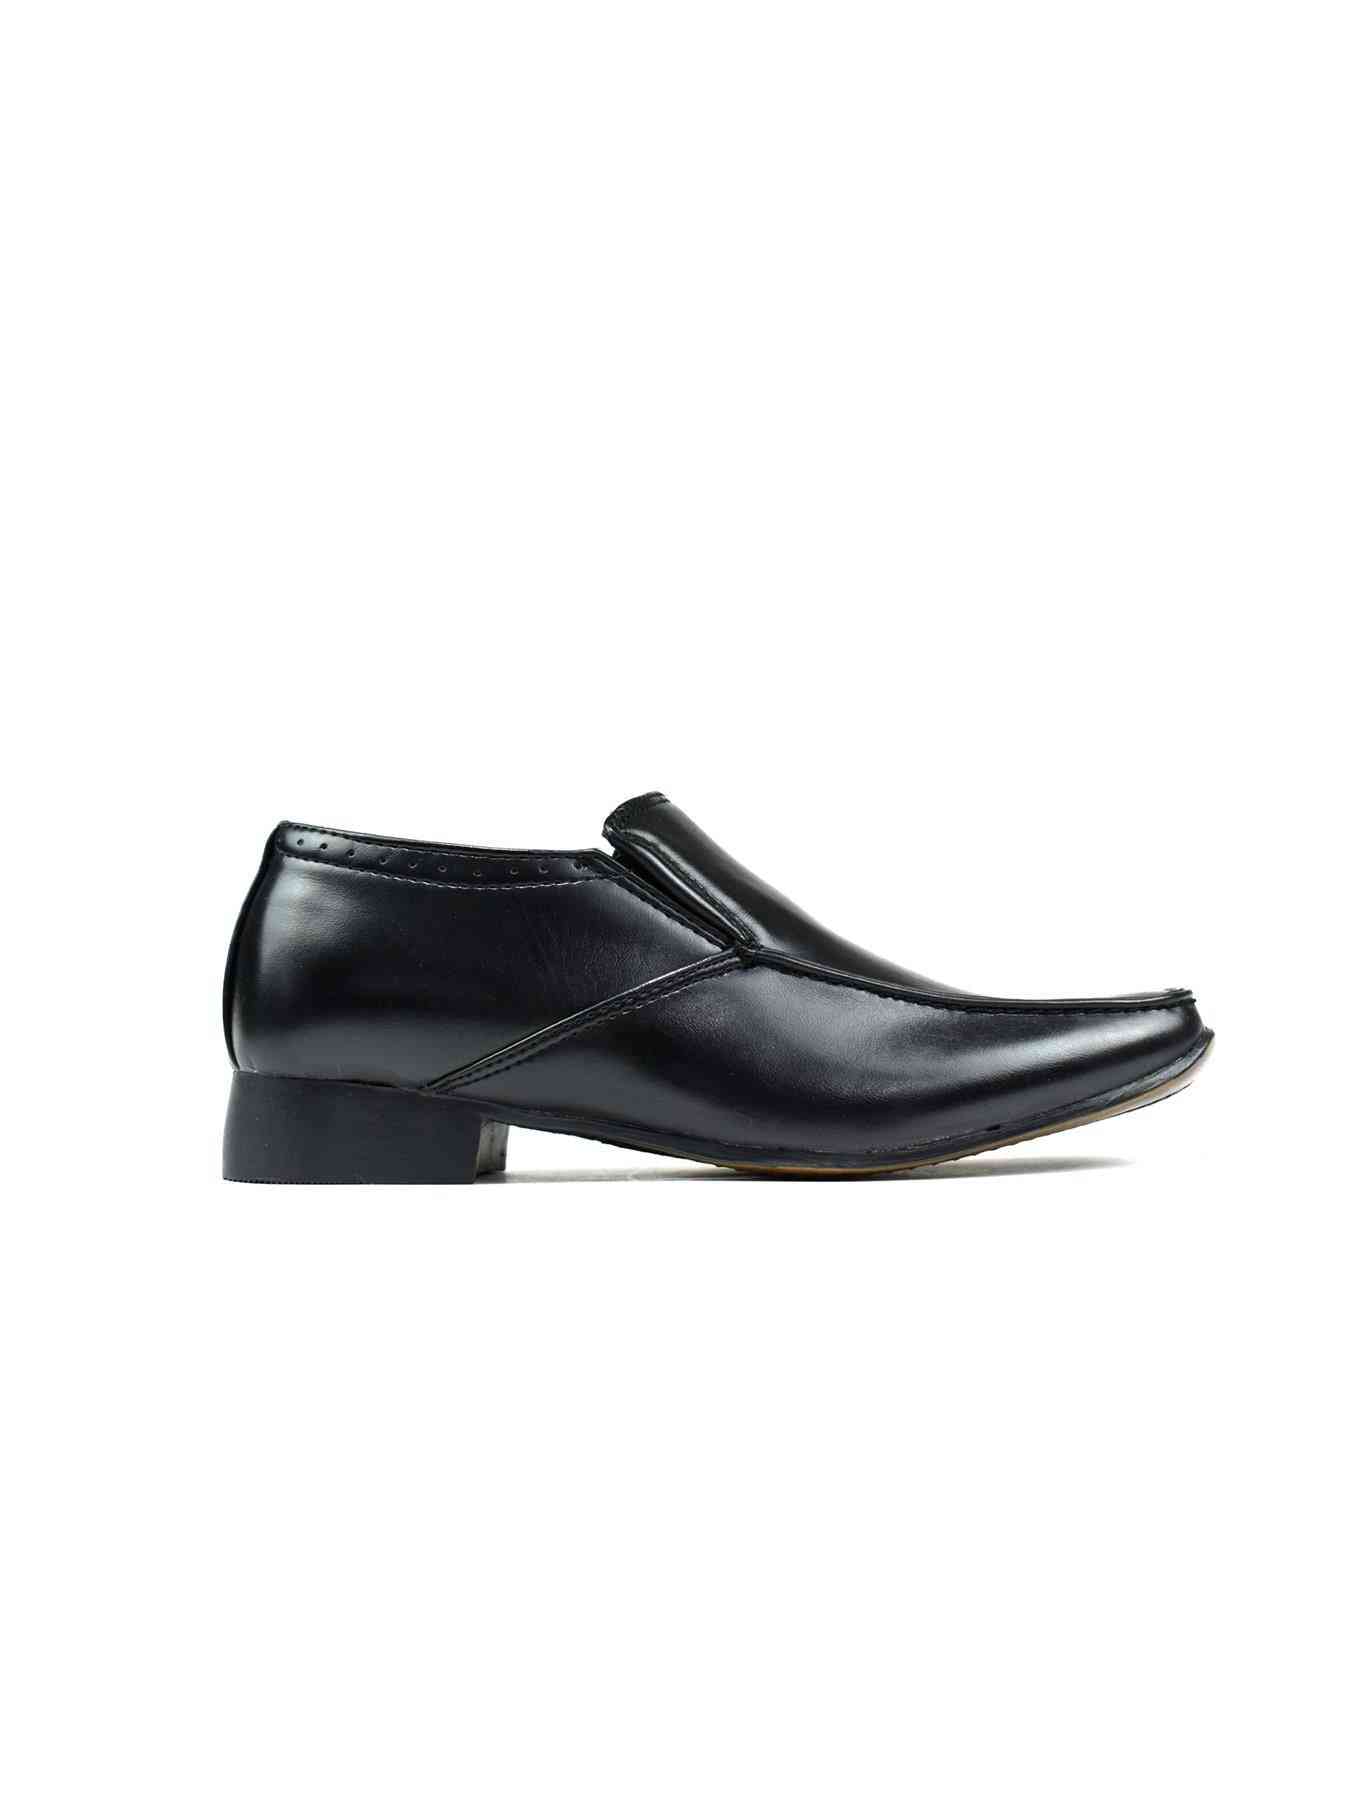 Men's Slip On Casual Shoes